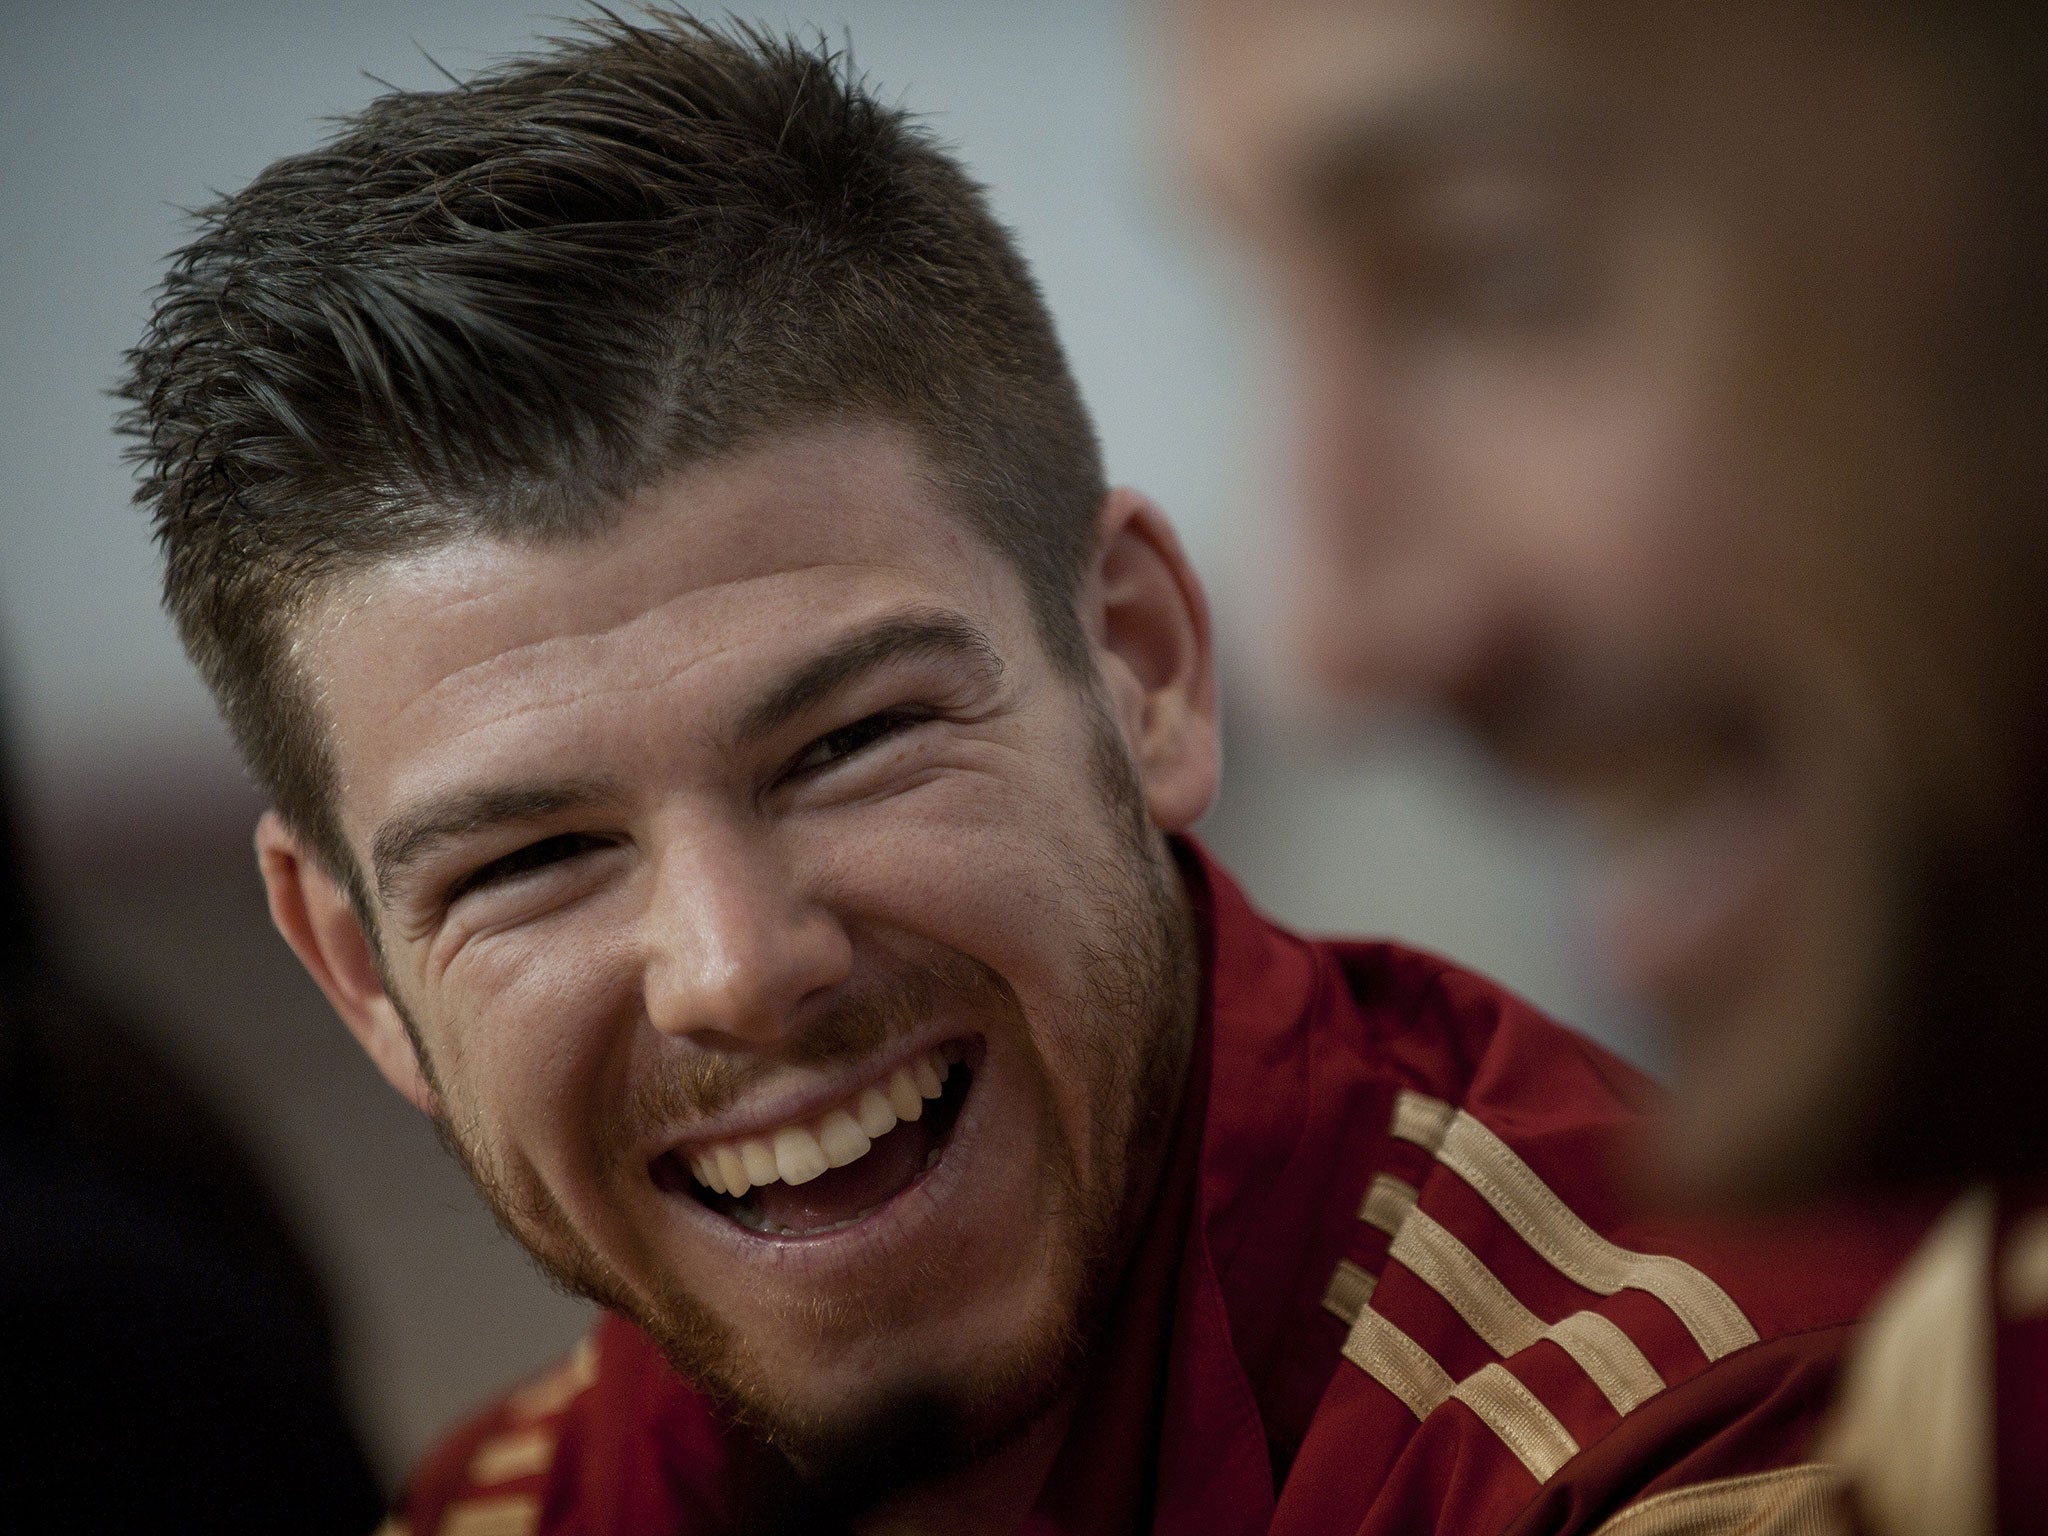 Alberto Moreno has attracted interest from Liverpool over a transfer, Seville's president has confirmed